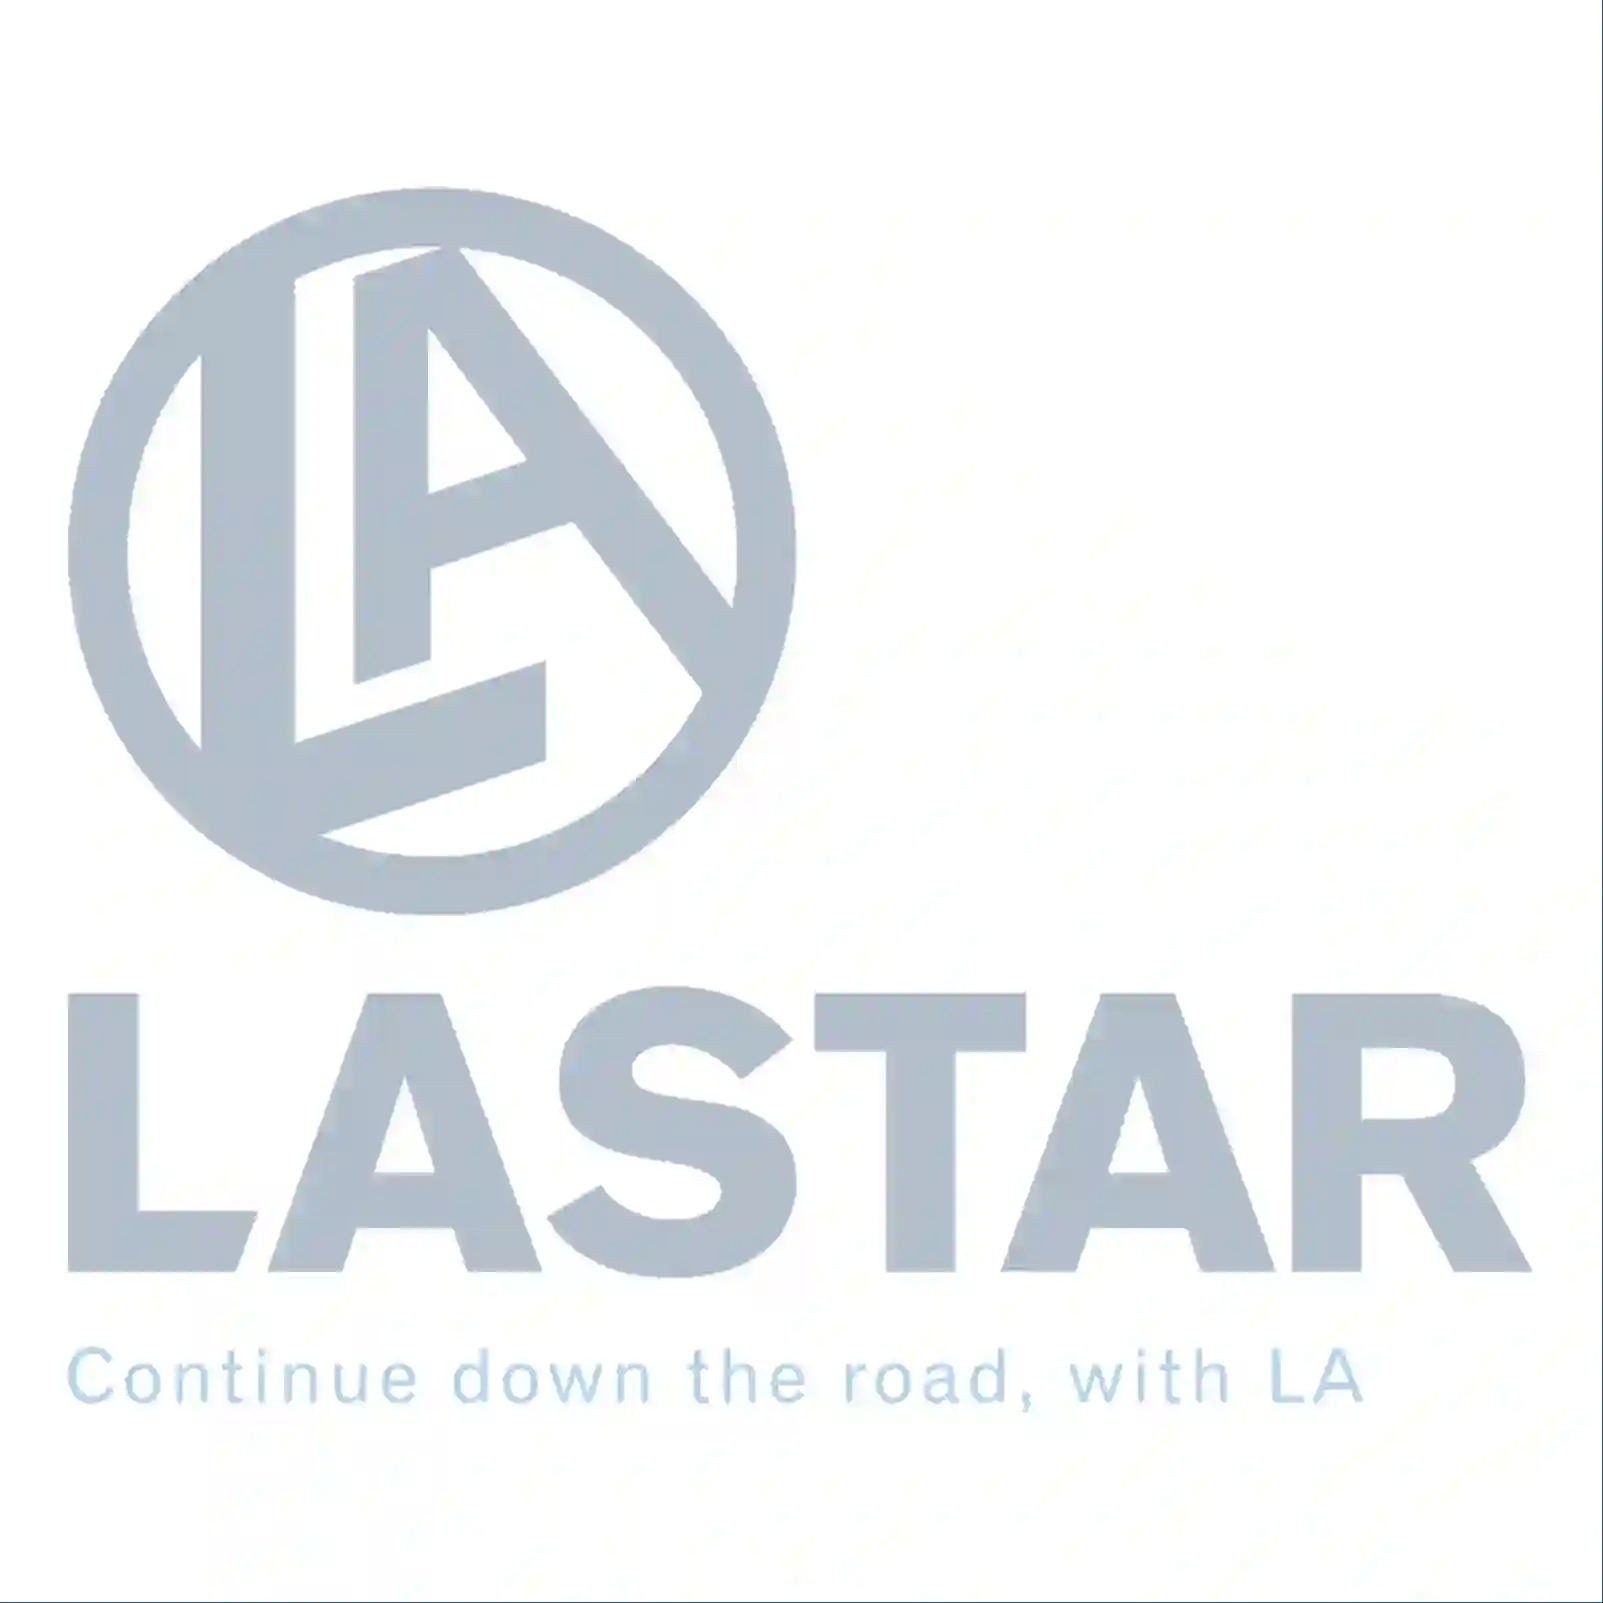  Load tester, starter battery, WEEE-Reg-No. DE 57605858 || Lastar Spare Part | Truck Spare Parts, Auotomotive Spare Parts